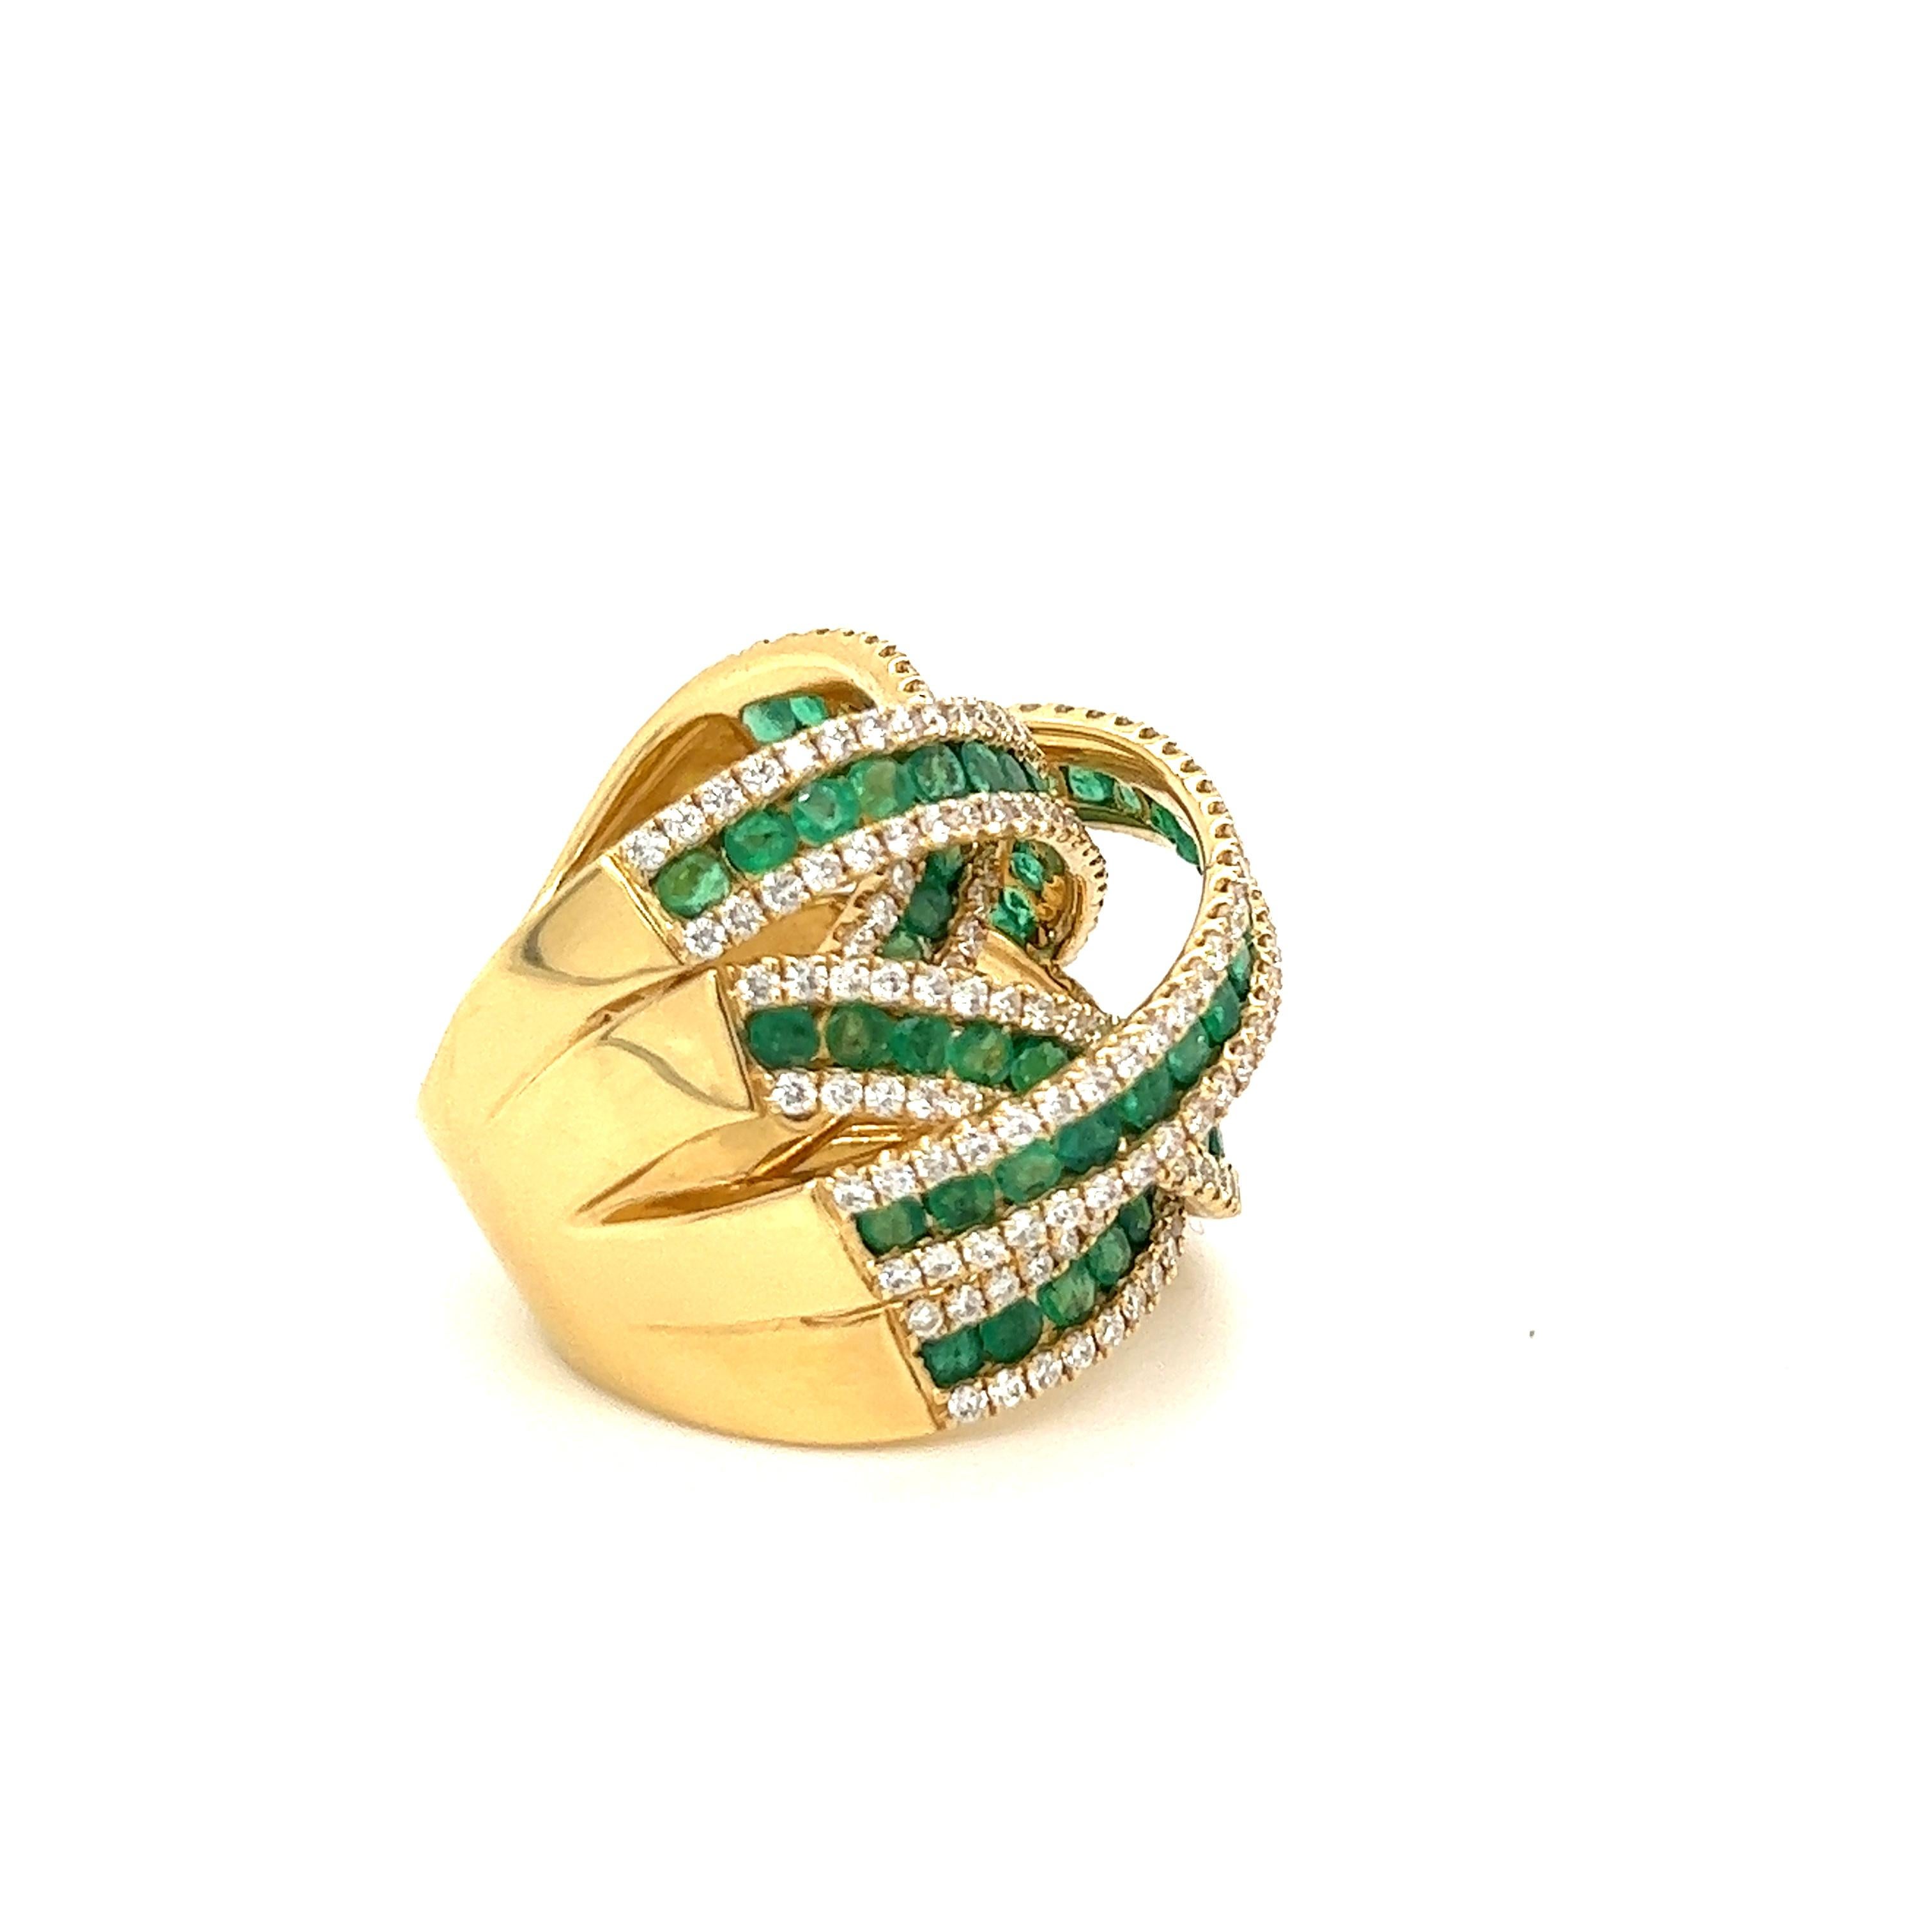 18 Karat Yellow Gold with Diamonds and Emeralds De Grisogono Inspired Style Ring For Sale 3